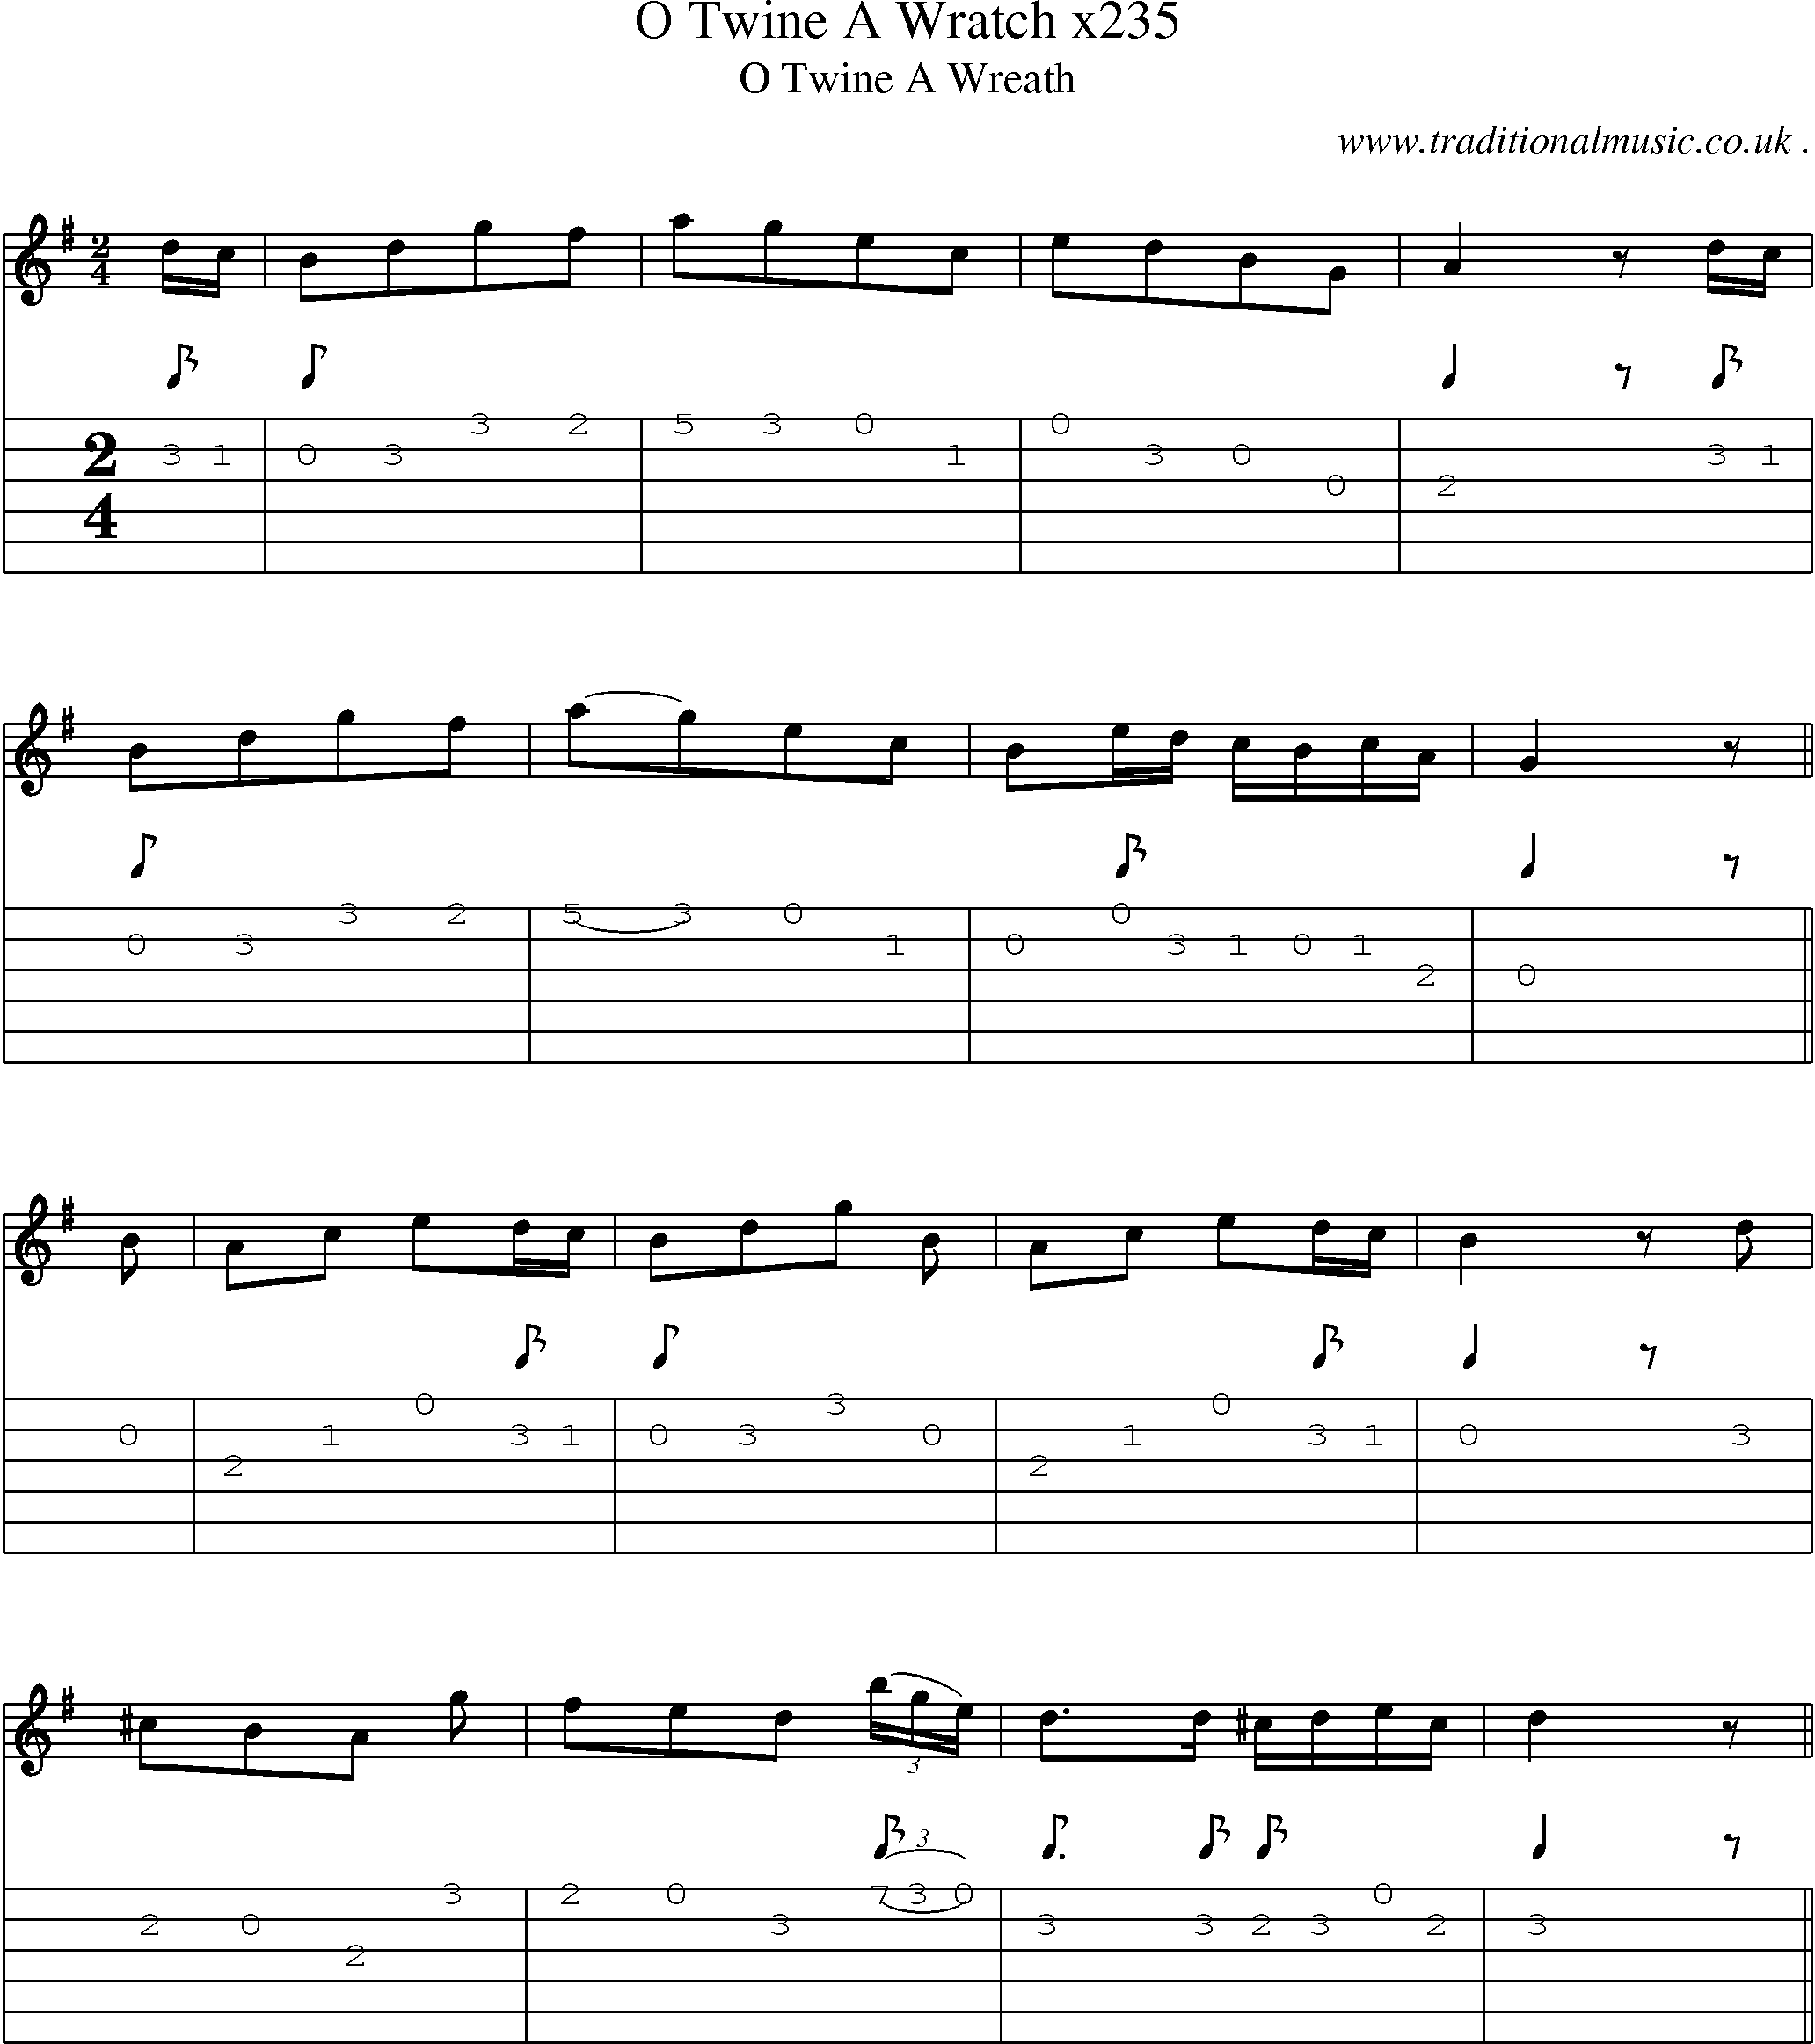 Sheet-Music and Guitar Tabs for O Twine A Wratch X235